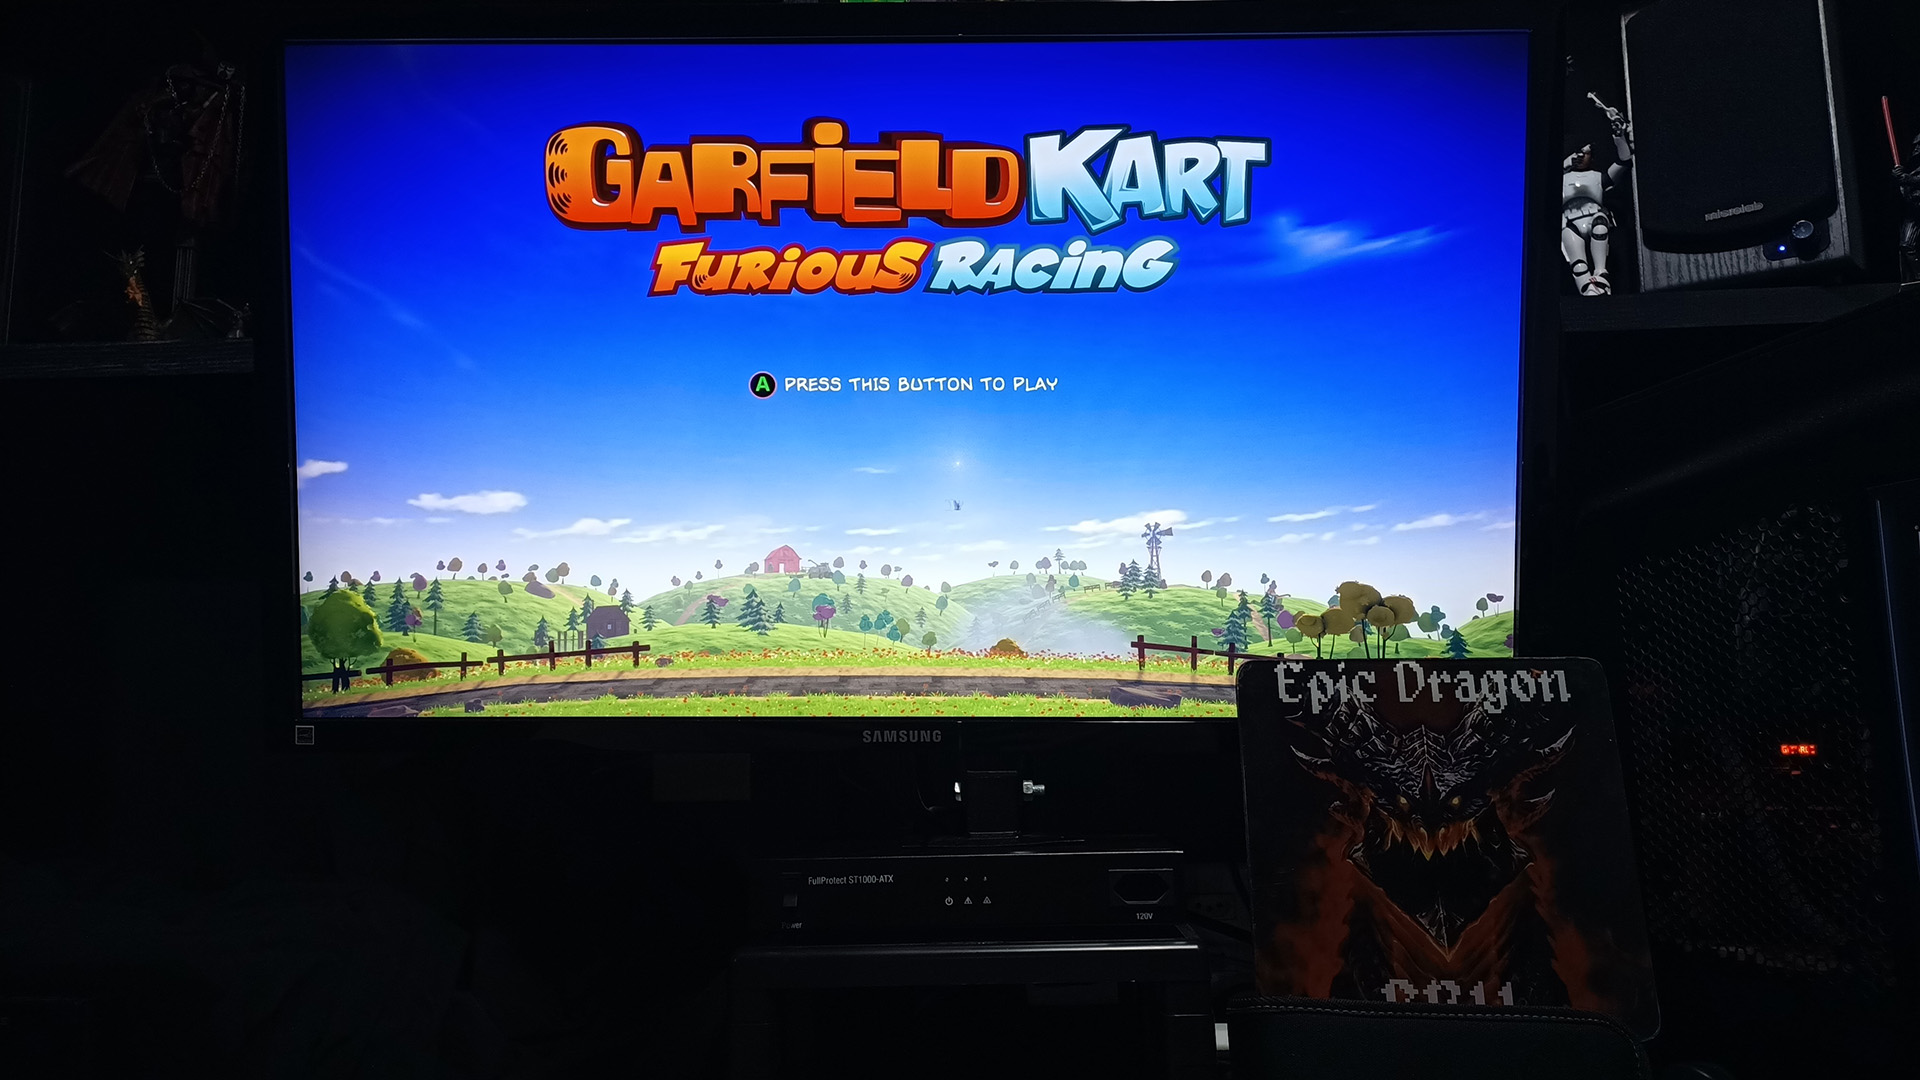 EpicDragon: Garfield Kart Furious Racing: Pastacosi Factory [Time Trial: 3 Laps] (PC) 0:02:30.805 points on 2022-08-08 21:23:01